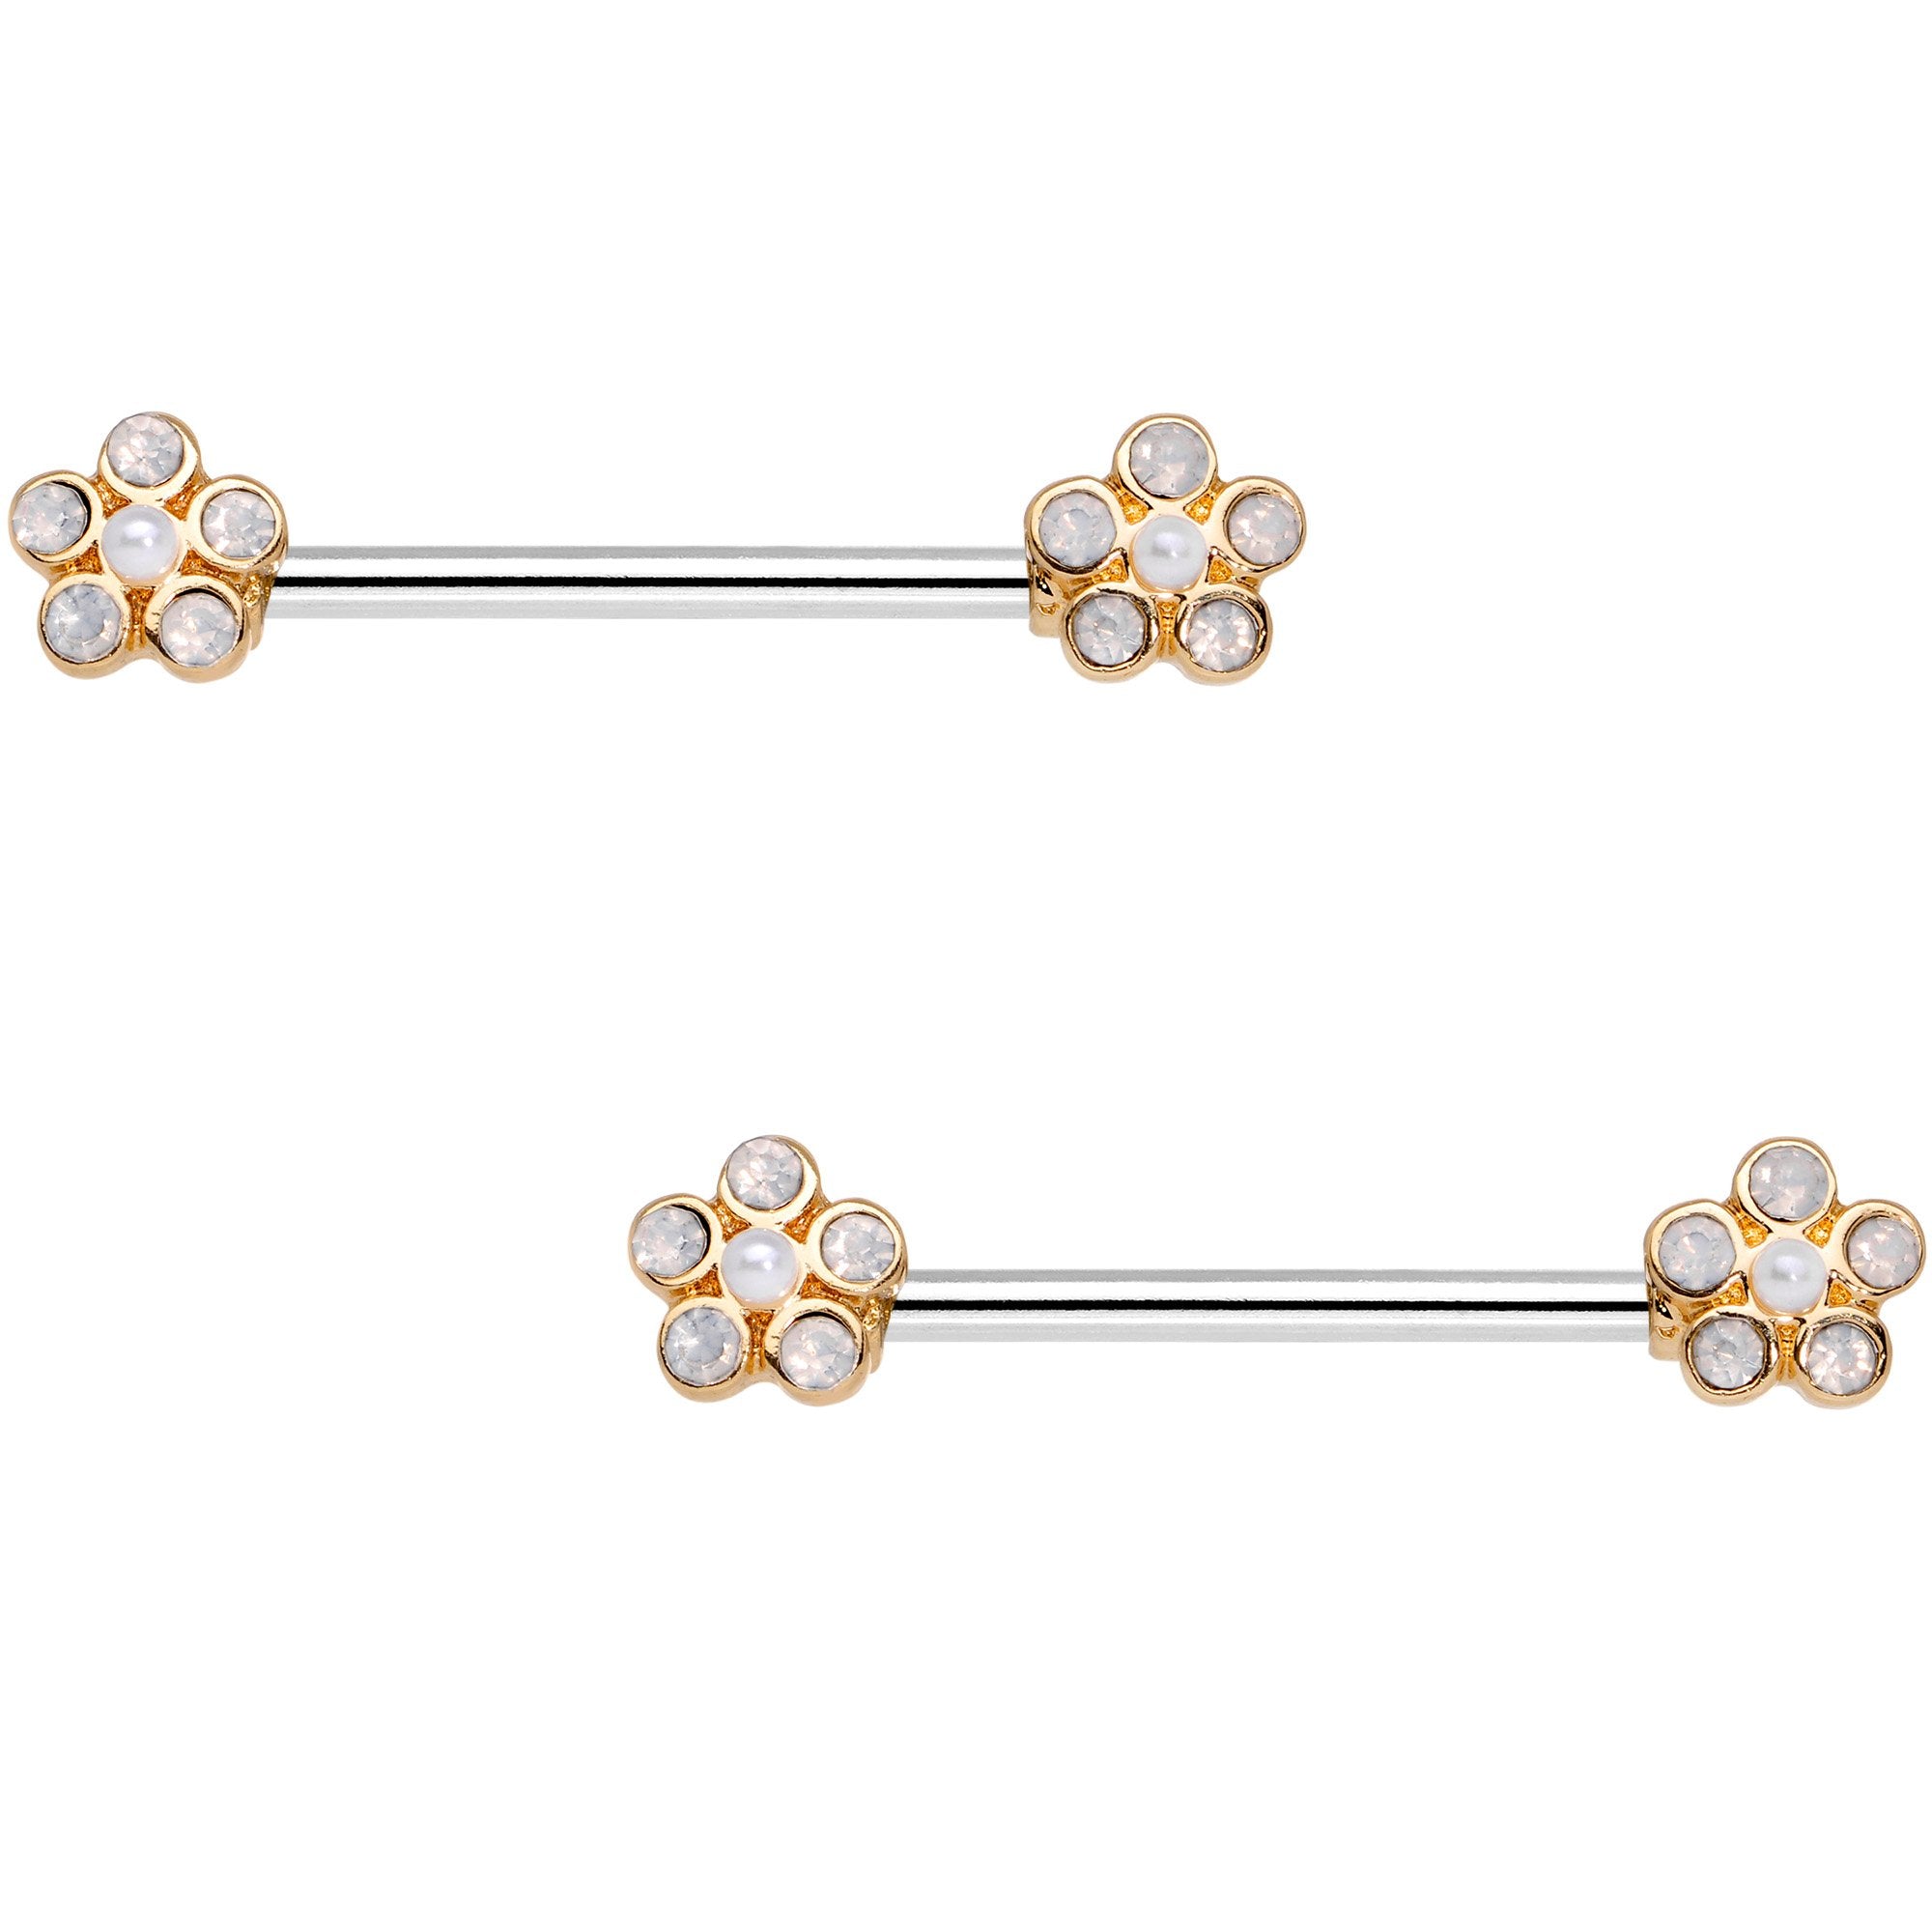 Clear Gem Gold Tone Bubbly Flower Barbell Nipple Ring Set